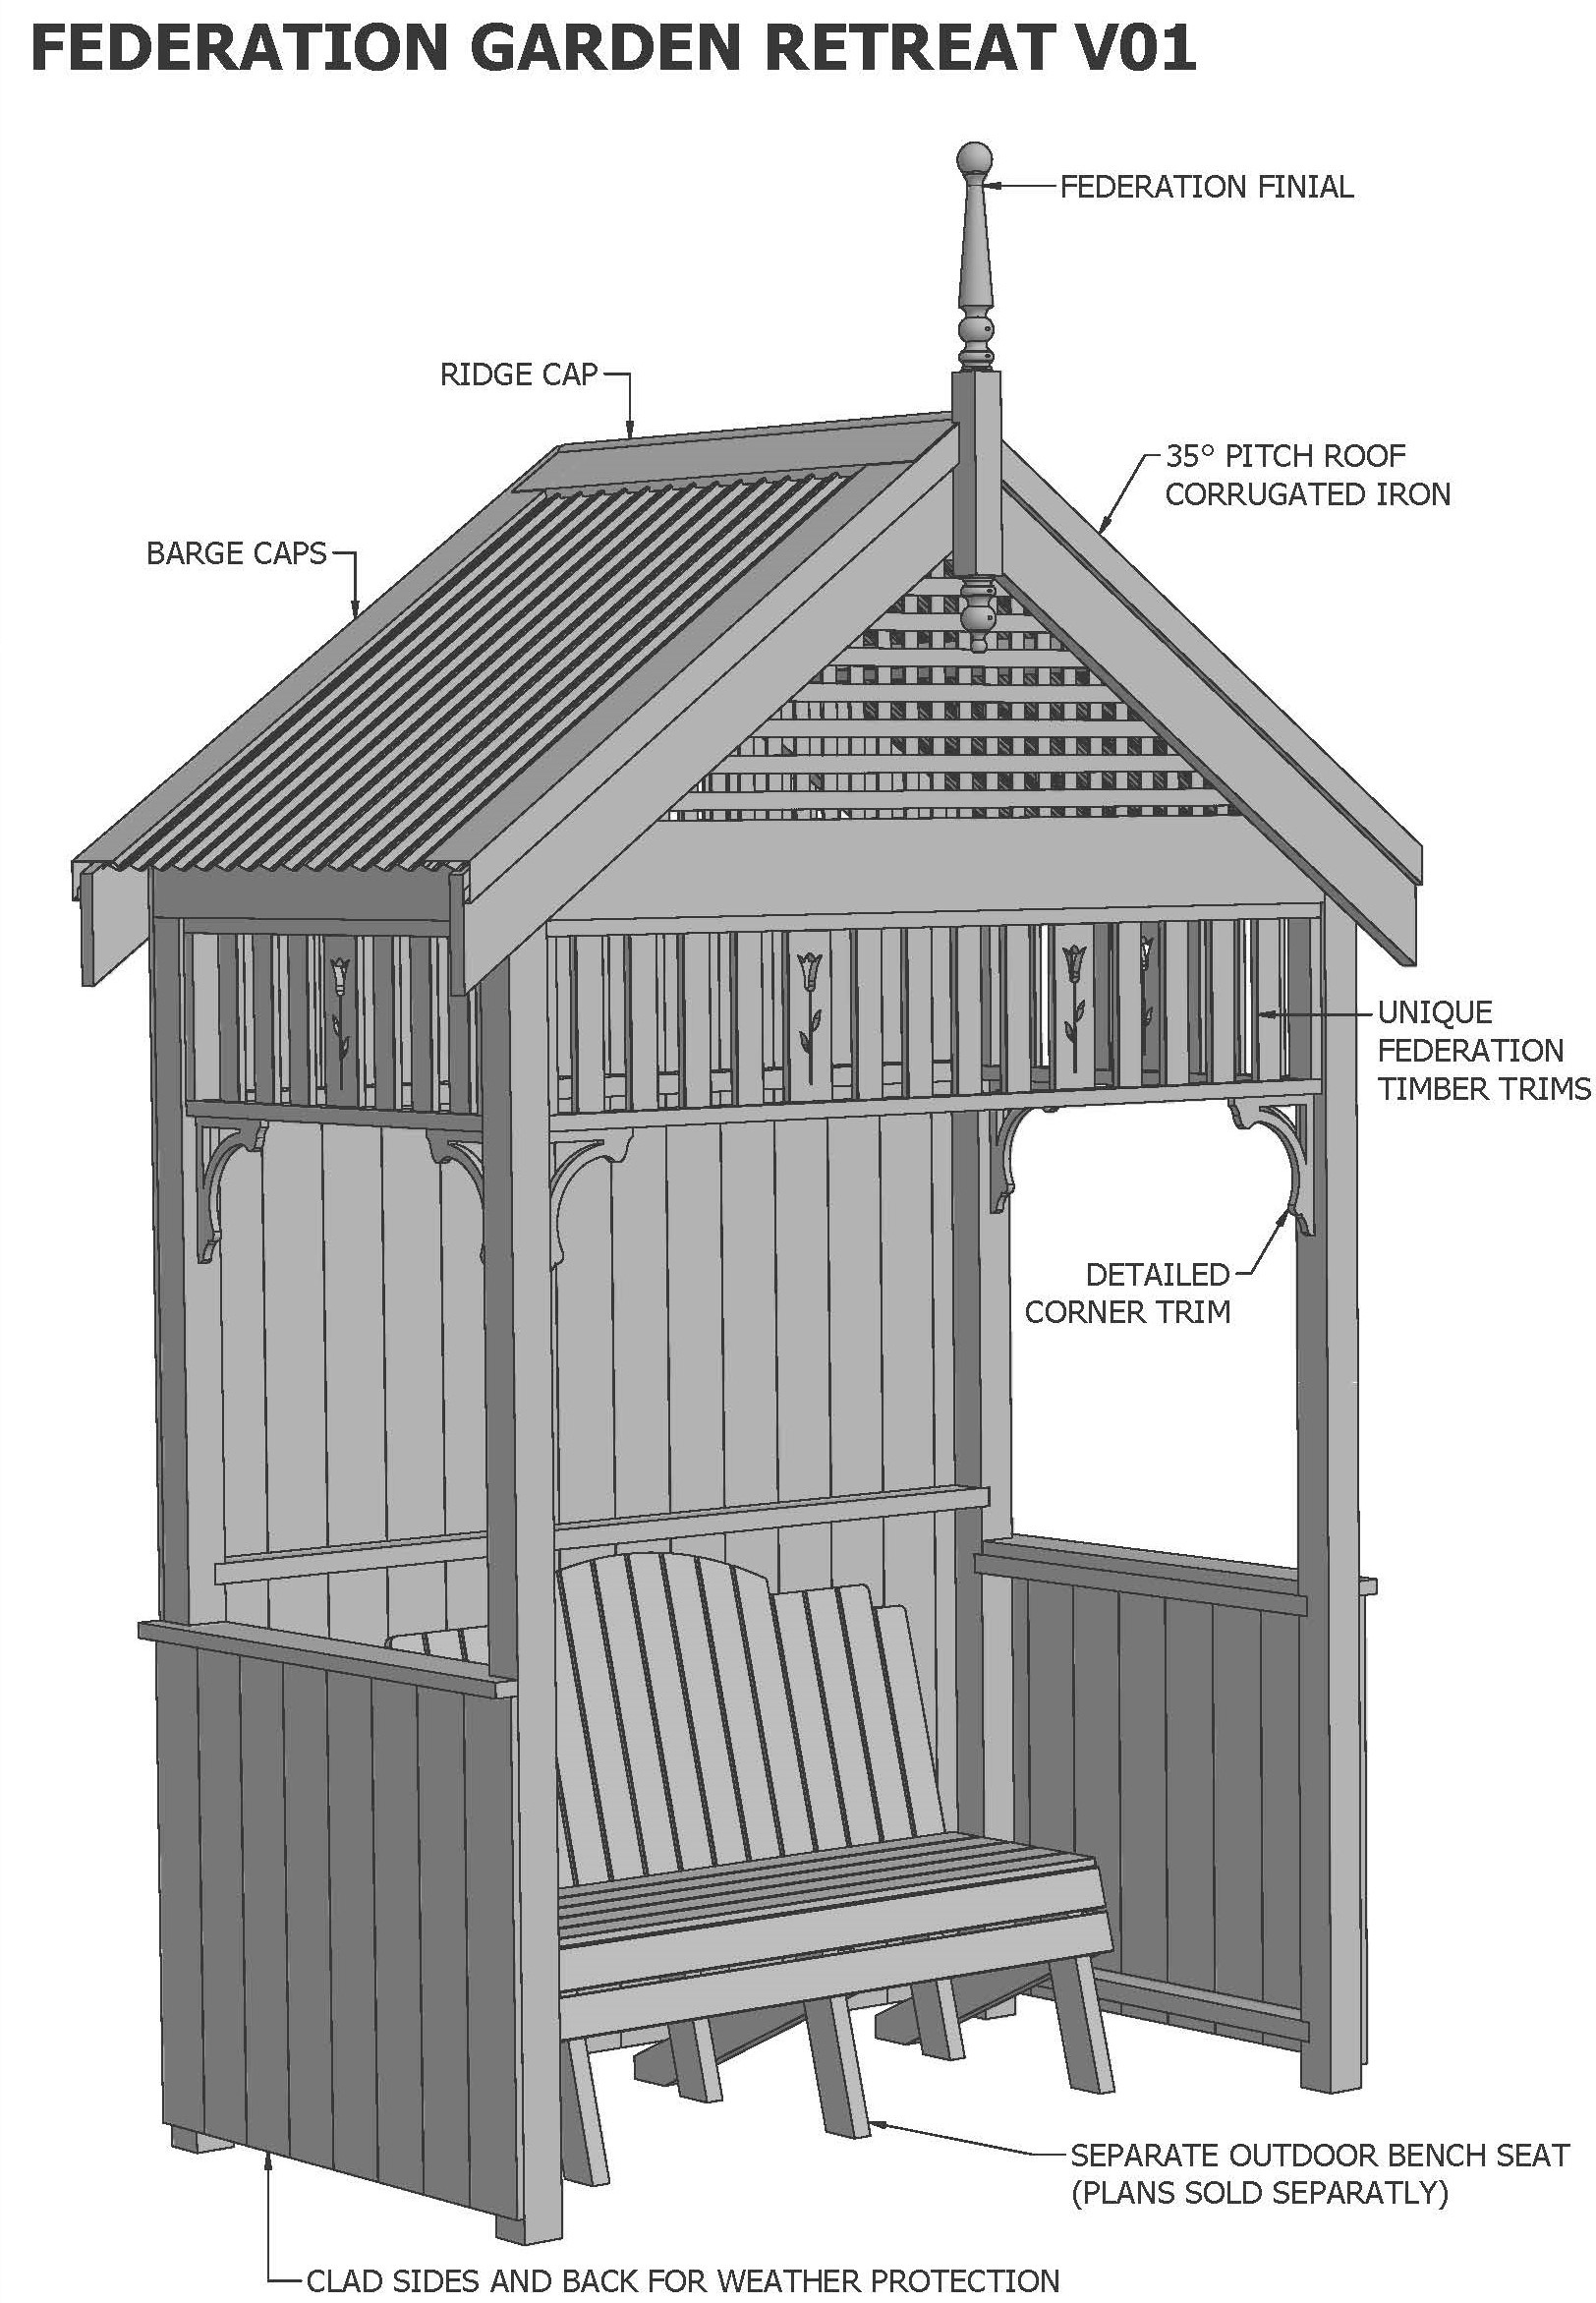 FEDERATION STYLE OUTDOOR GARDEN RETREAT HIDE AWAY V01 (Building Plans ONLY)